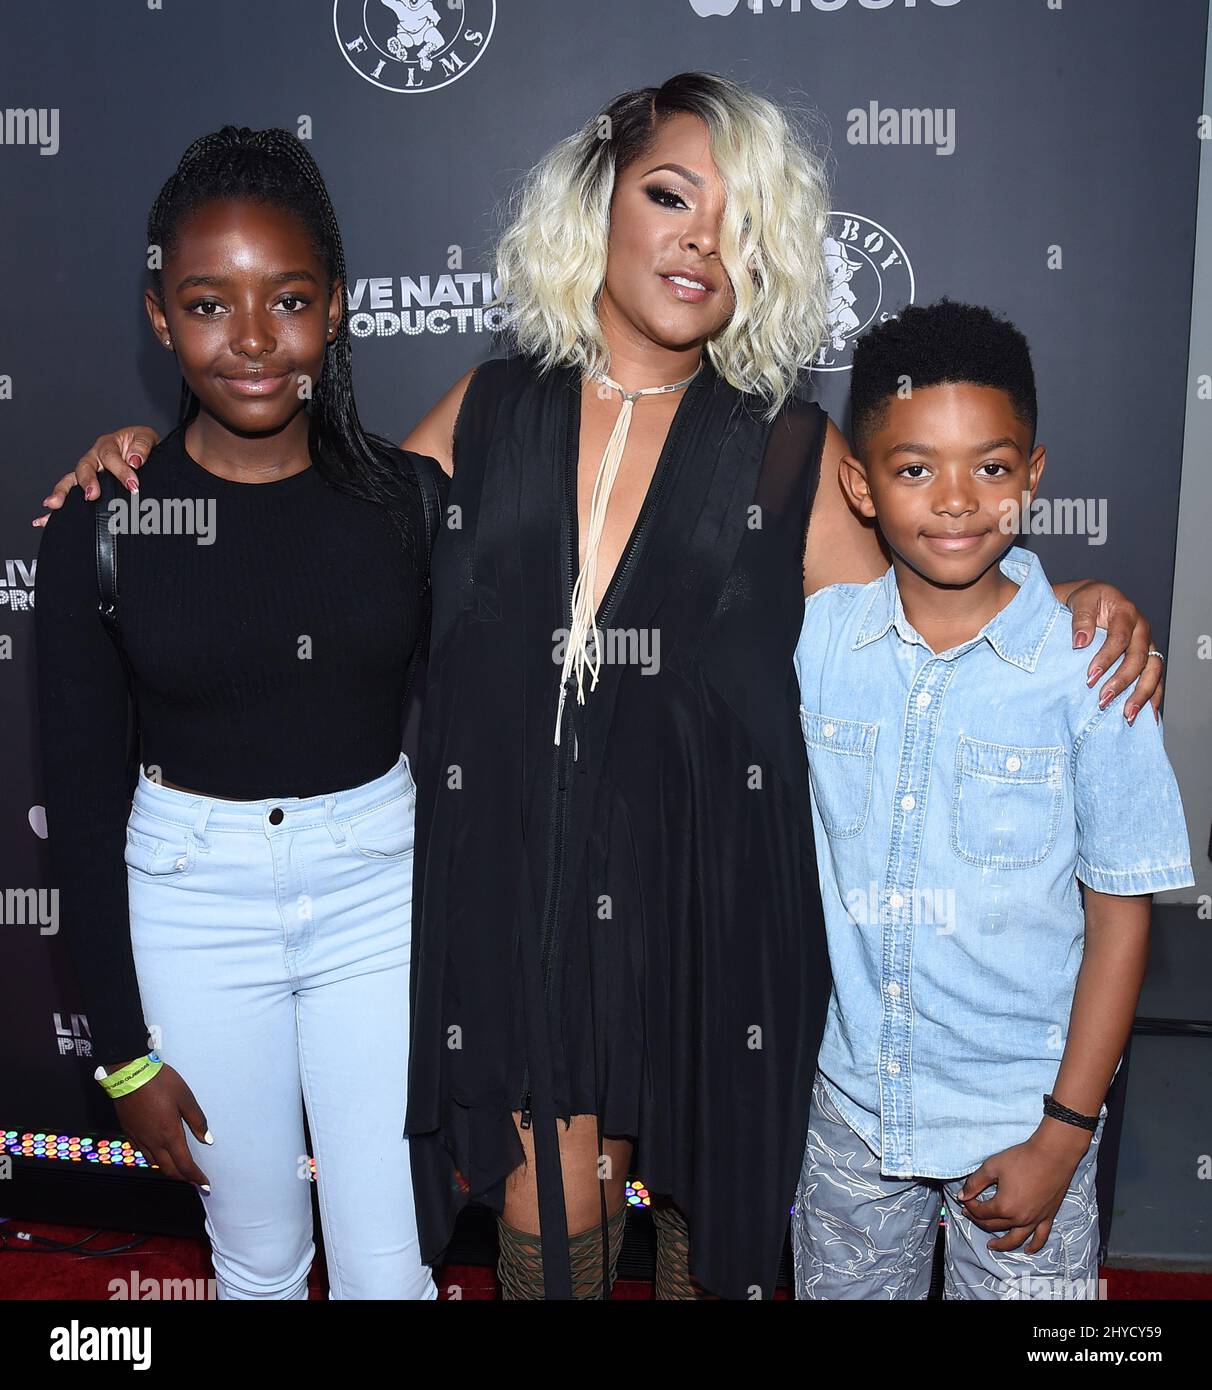 K'mari Mae Epps, Keisha Spivey Epps and Amir Epps attending the 'Can't Stop, Won't Stop: A Bad Boy Story' premiere held at the Writers Guild of America in Los Angeles, USA Stock Photo